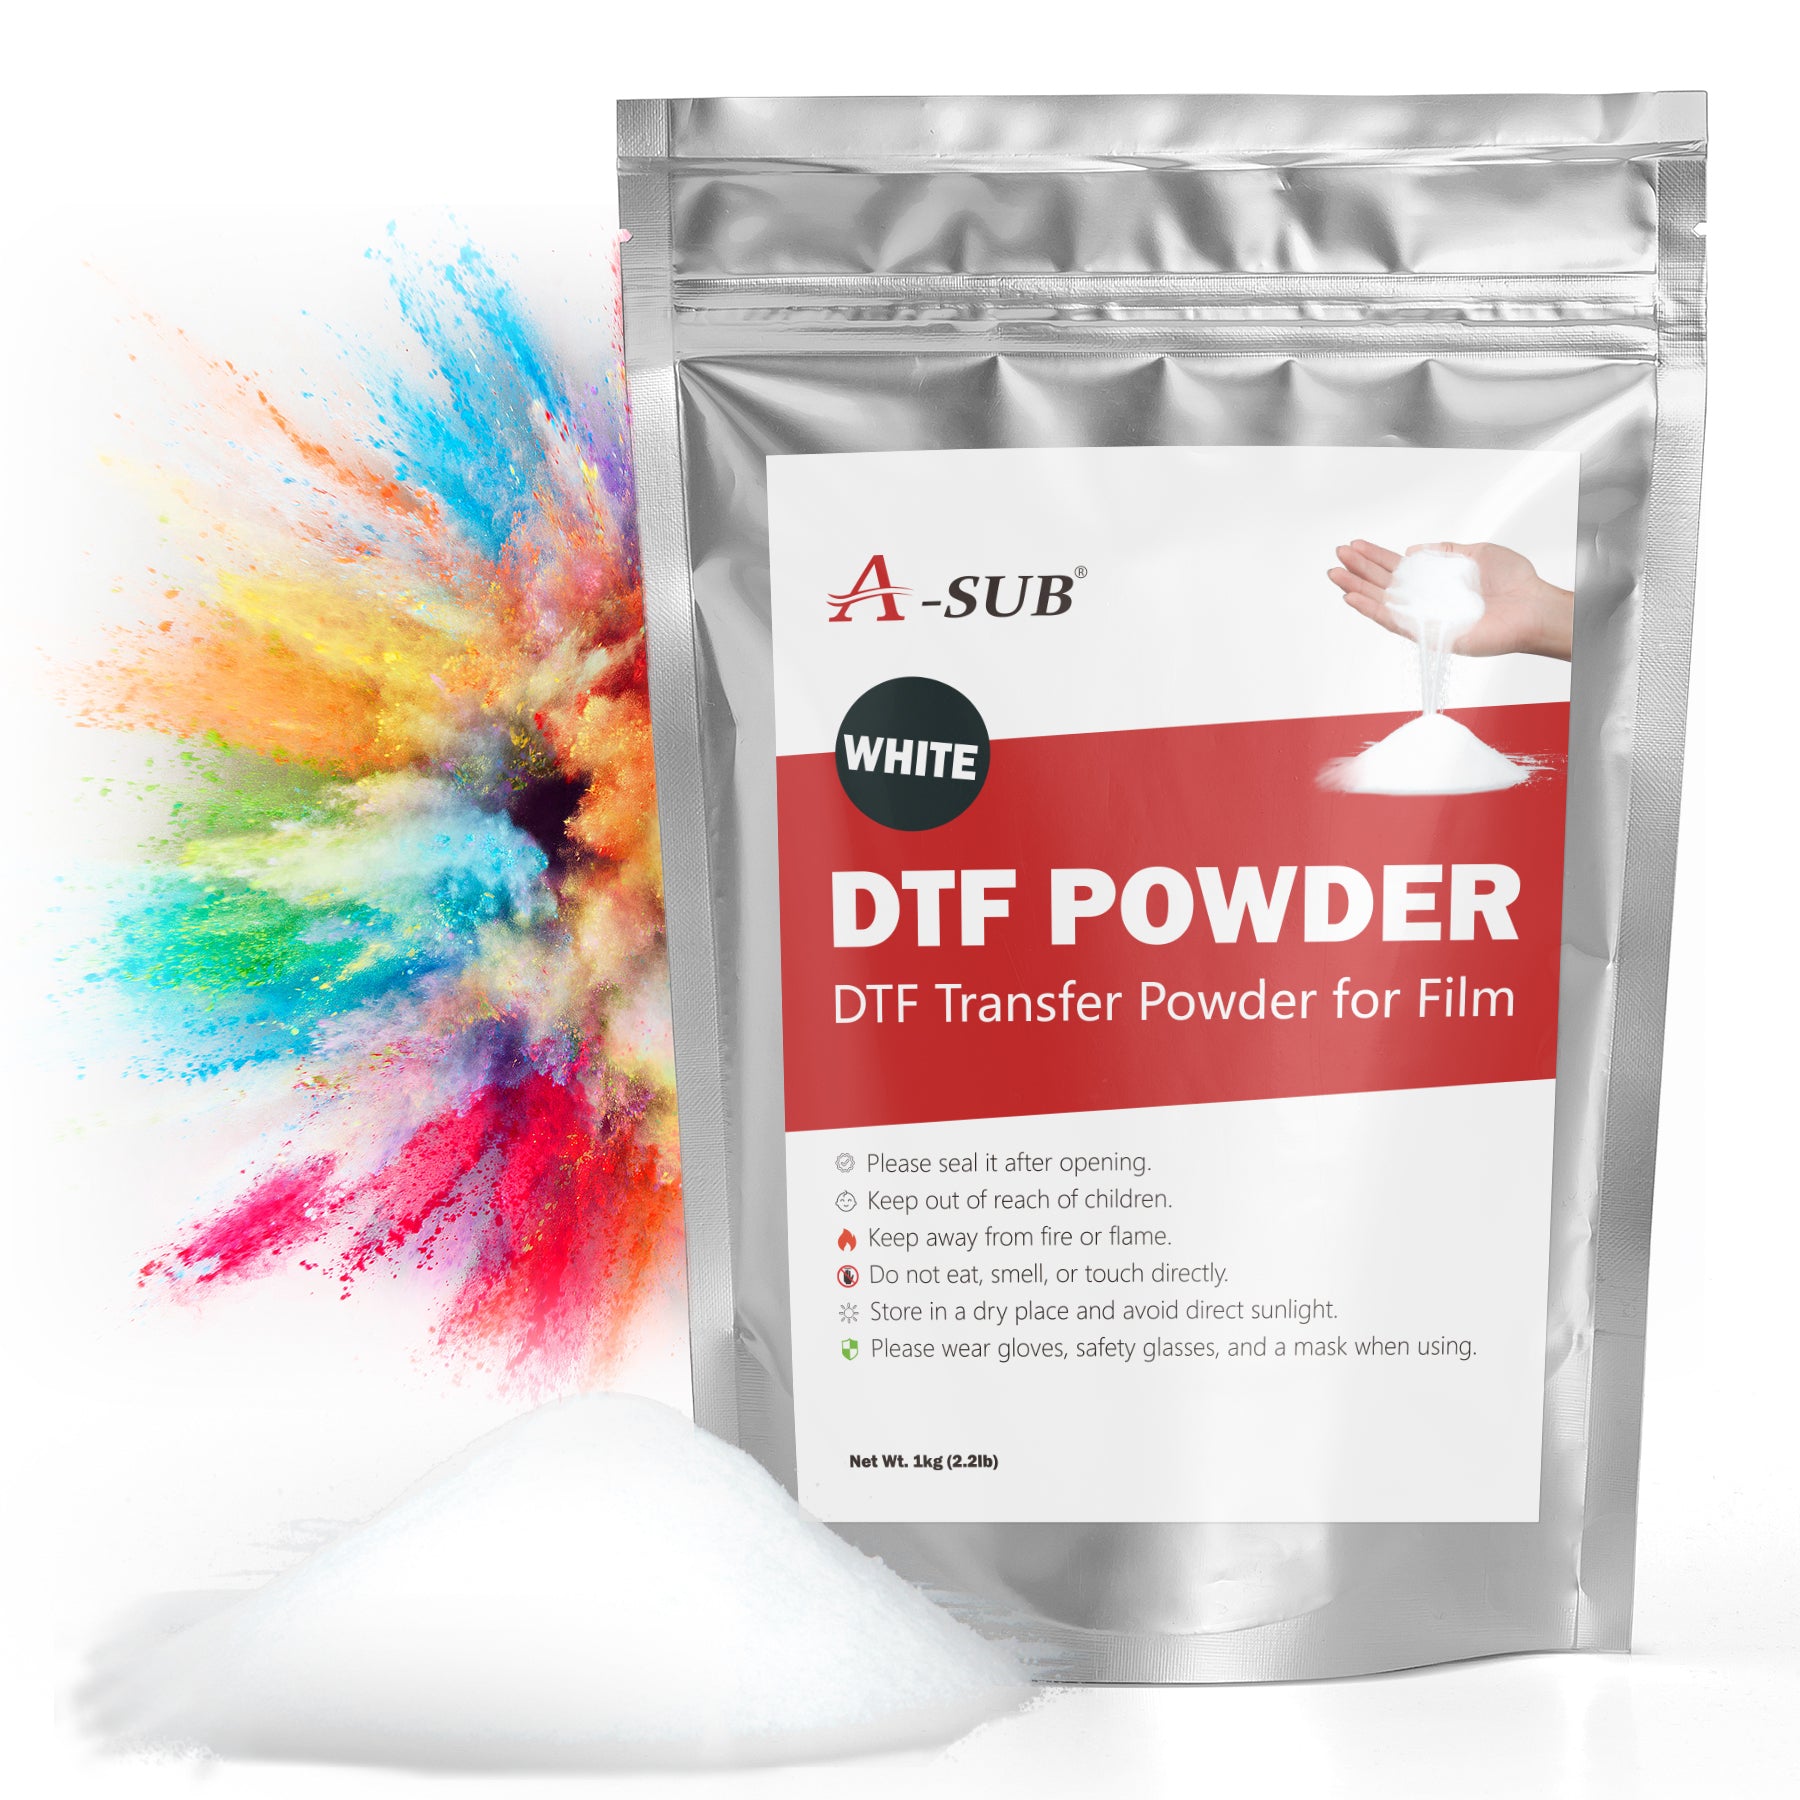 1000g Hot Melt Adhesive Powder For Sublimation To Cotton,transfer Plastisol  Dtf Powder For Dtf Printer - Ink Refill Kits - AliExpress